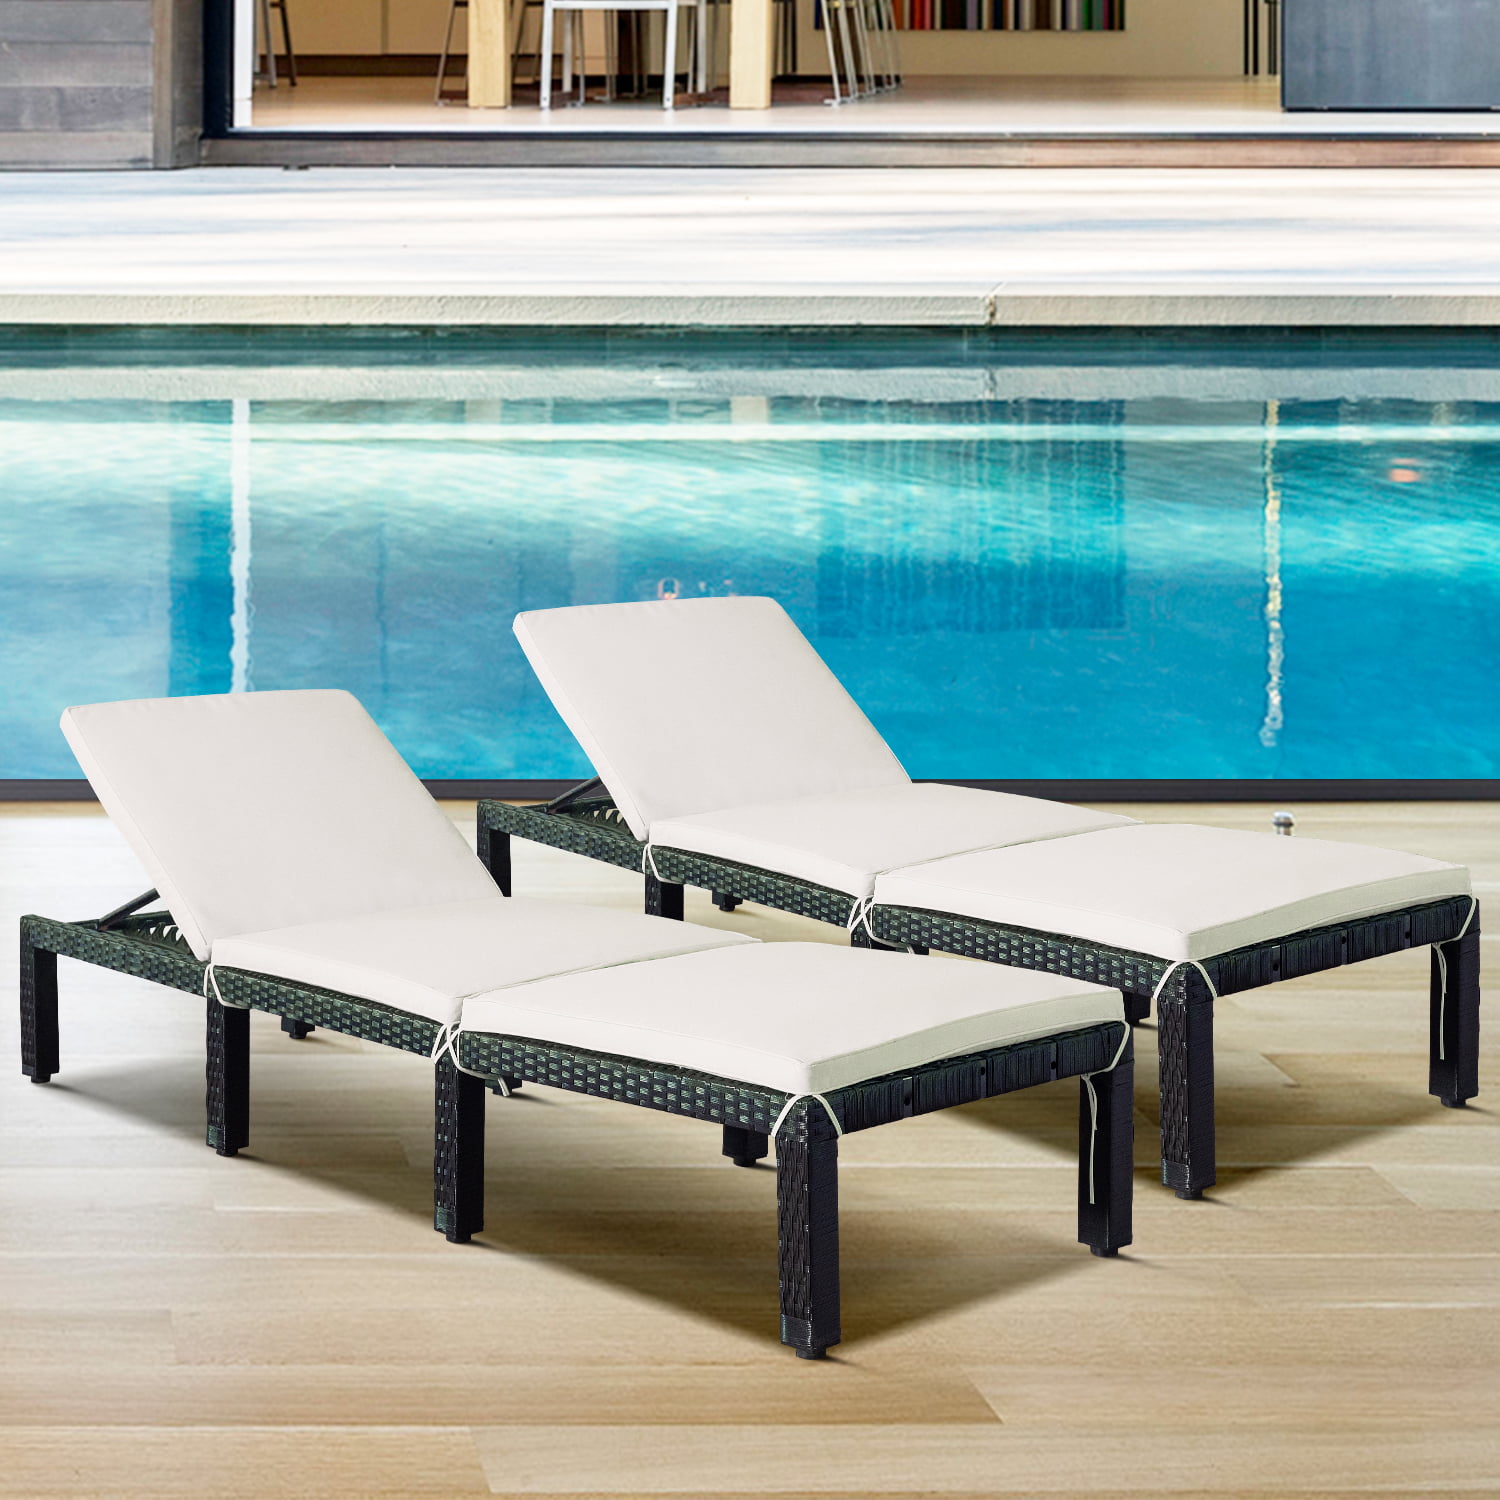 Reclining Lounge Chair, Chaise Lounge Chairs For Pool